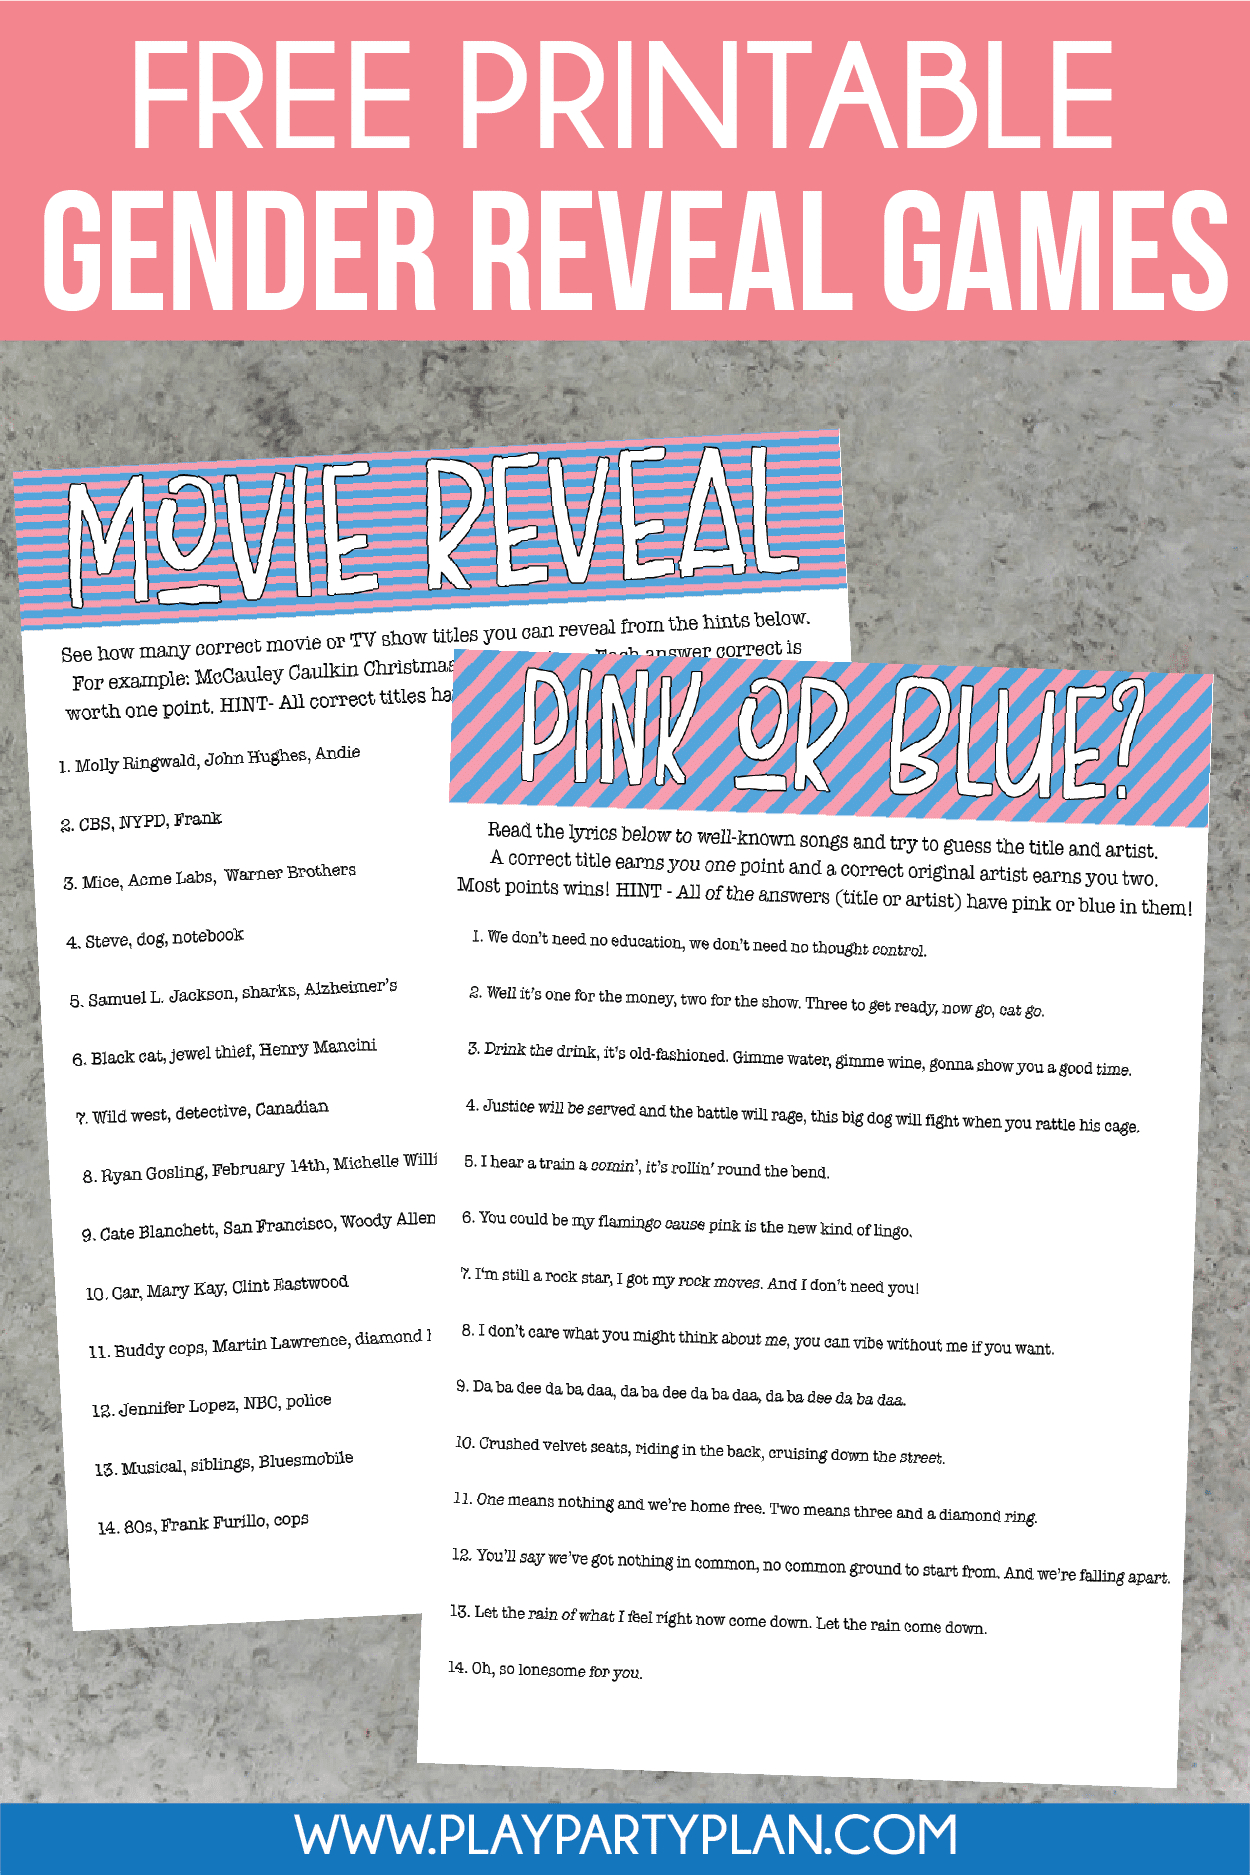 12 Of The Best Gender Reveal Party Games Ever - Play Party Plan - Free Printable Gender Reveal Templates